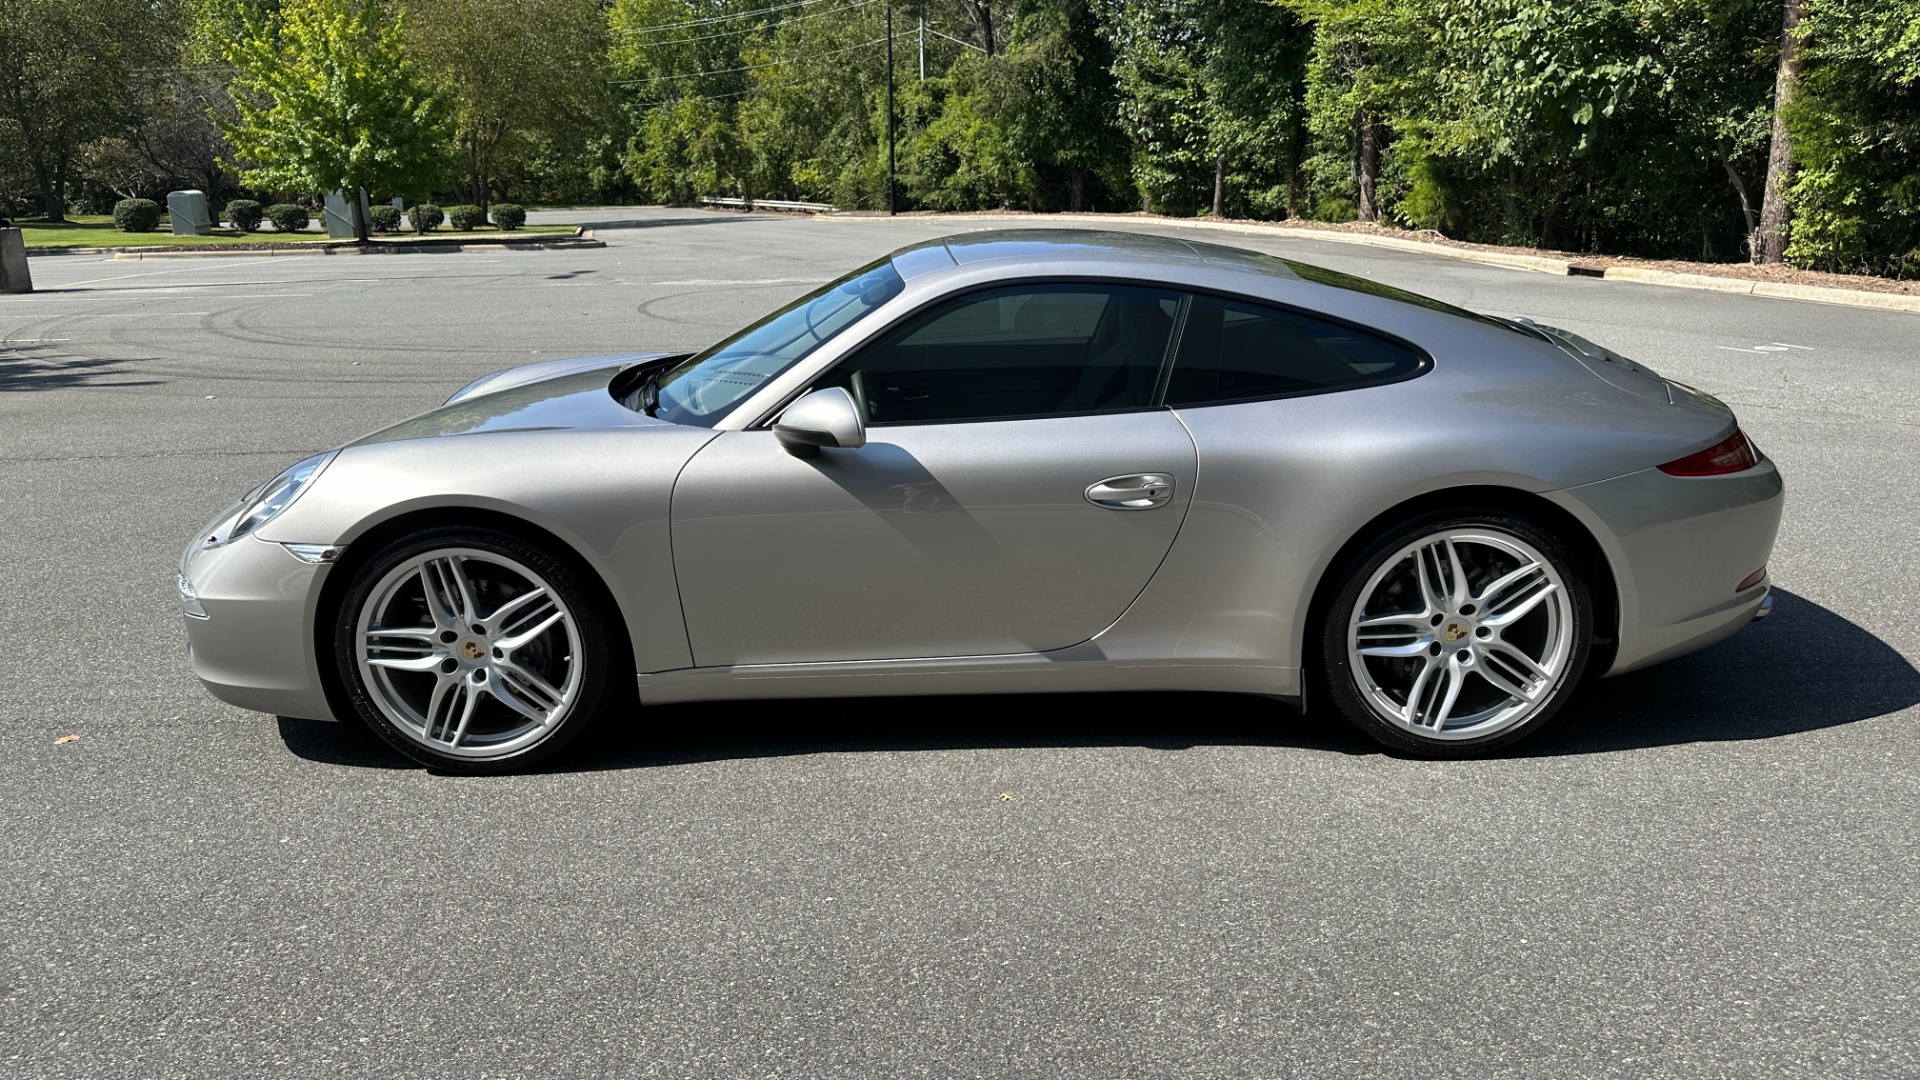 Used 2012 Porsche 911 991 CARRERA / PREMIUM PKG PLUS / SPORT EXHAUST / SPORT SEATS for sale Sold at Formula Imports in Charlotte NC 28227 6